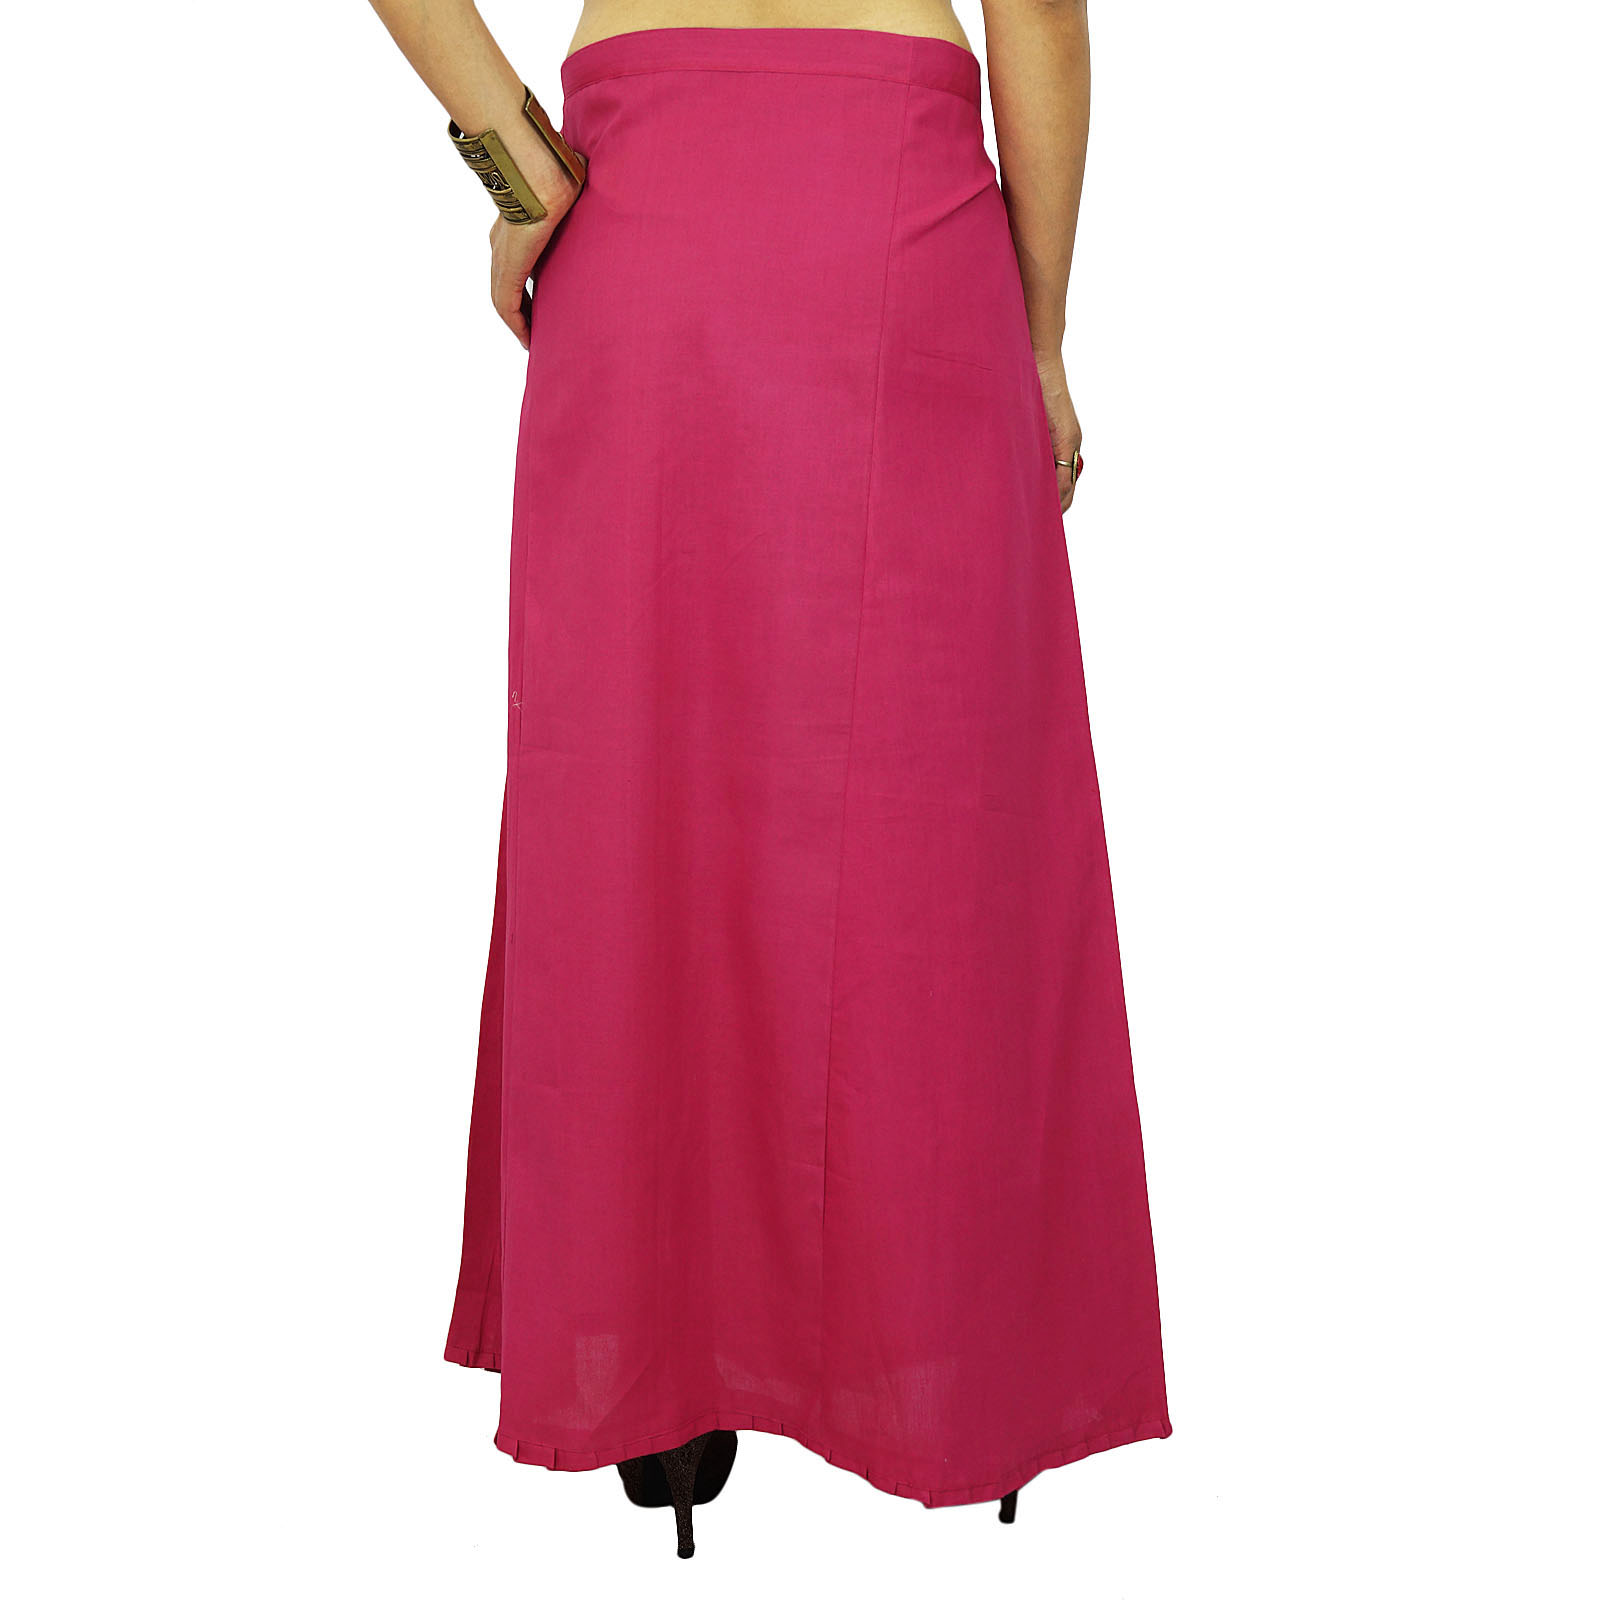 Inskirt Lining For Sari Ethnic Indian Ready-made Solid Cotton Petticoat ...